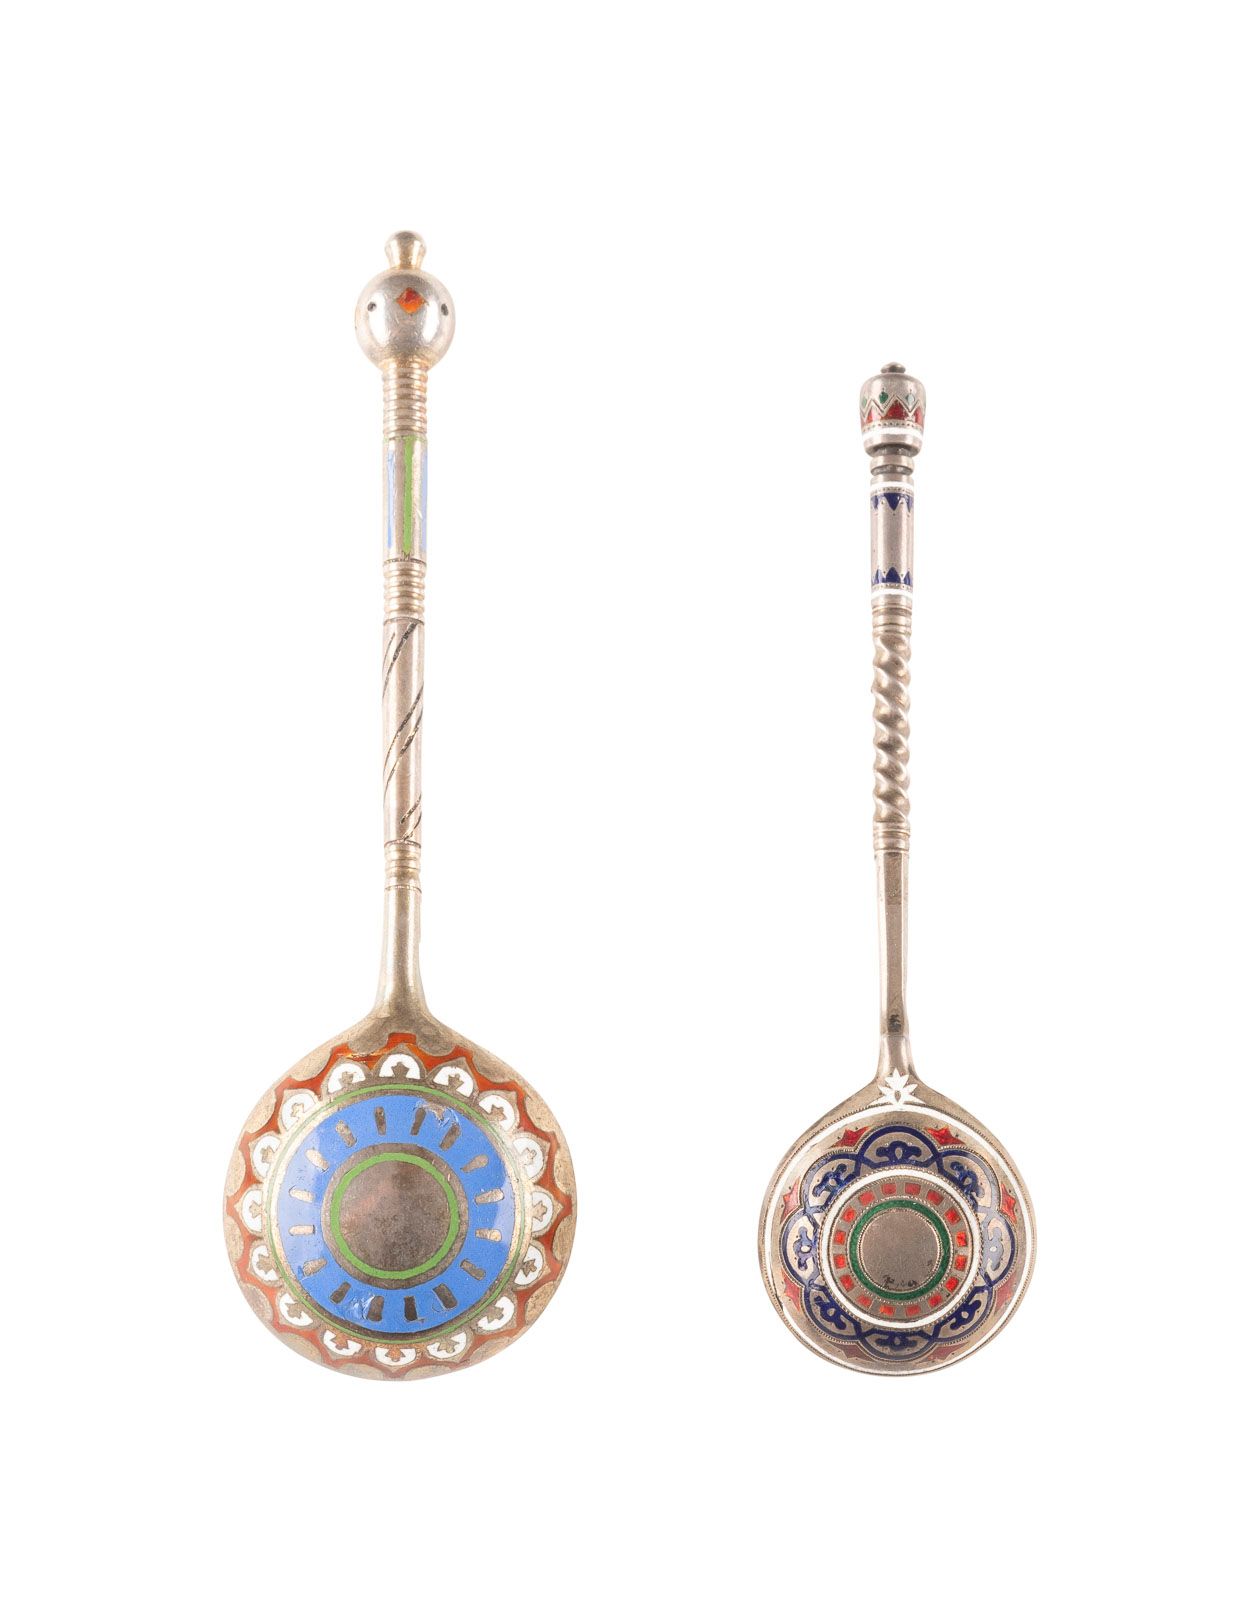 TWO SILVER-GILT AND CHAMPLEVÉ ENAMEL SPOONS TWO SILVER-GILT AND CHAMPLEVÉ ENAMEL&hellip;